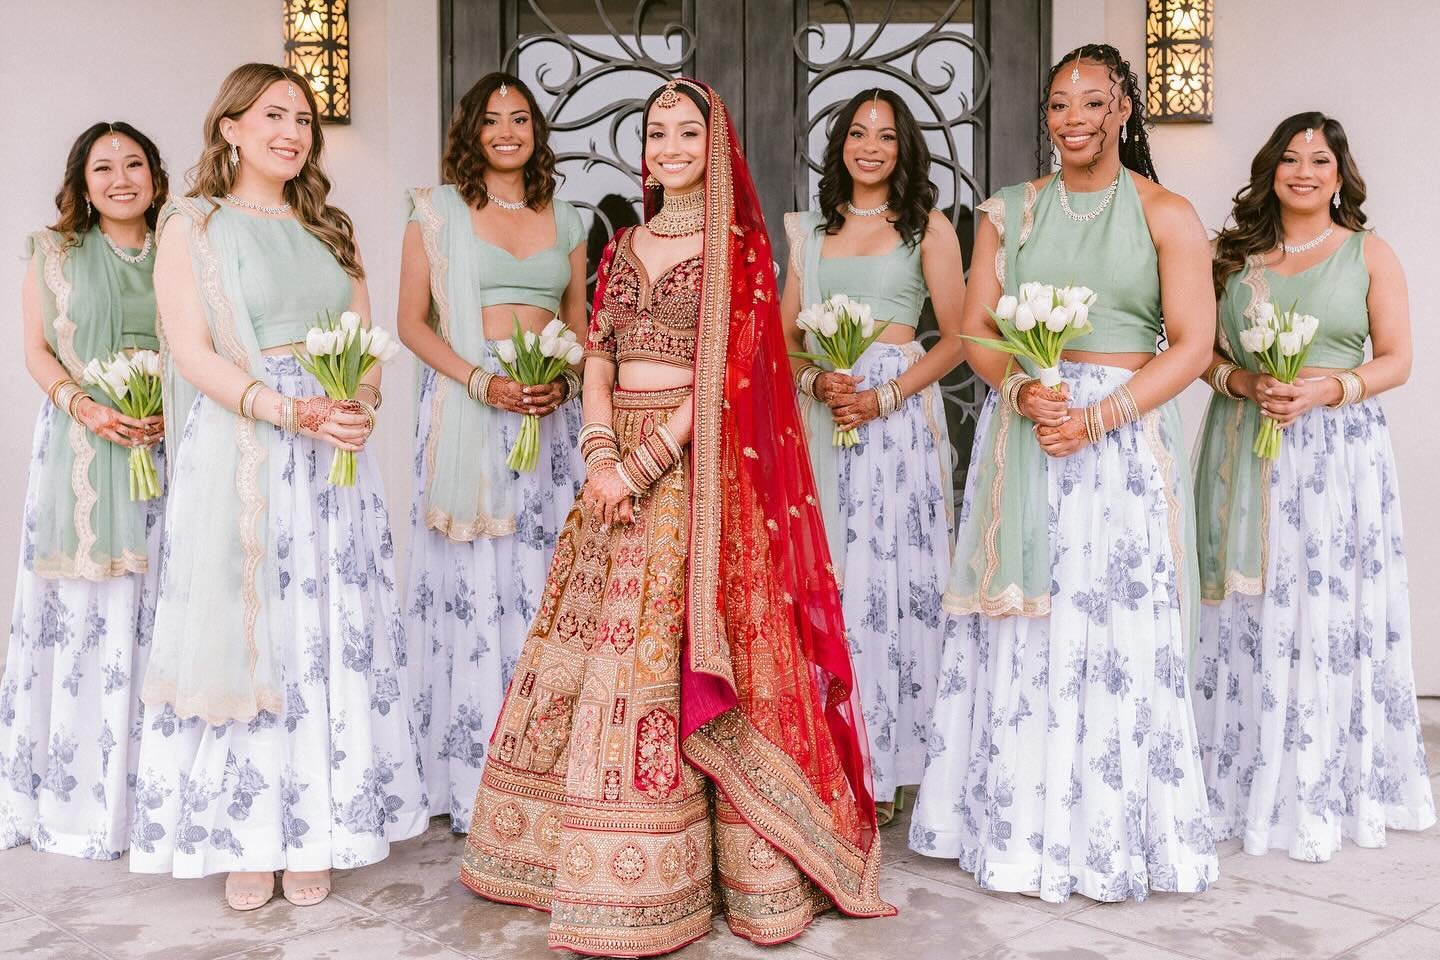 Minimalist, fresh and breezy Bridesmaids outfit palette ✔️Thank you for letting us dress your besties Rakshana! We had such fun with these sets and their color selections.
Proof that using a neutral base lets you play around with ANY colors to pop, f